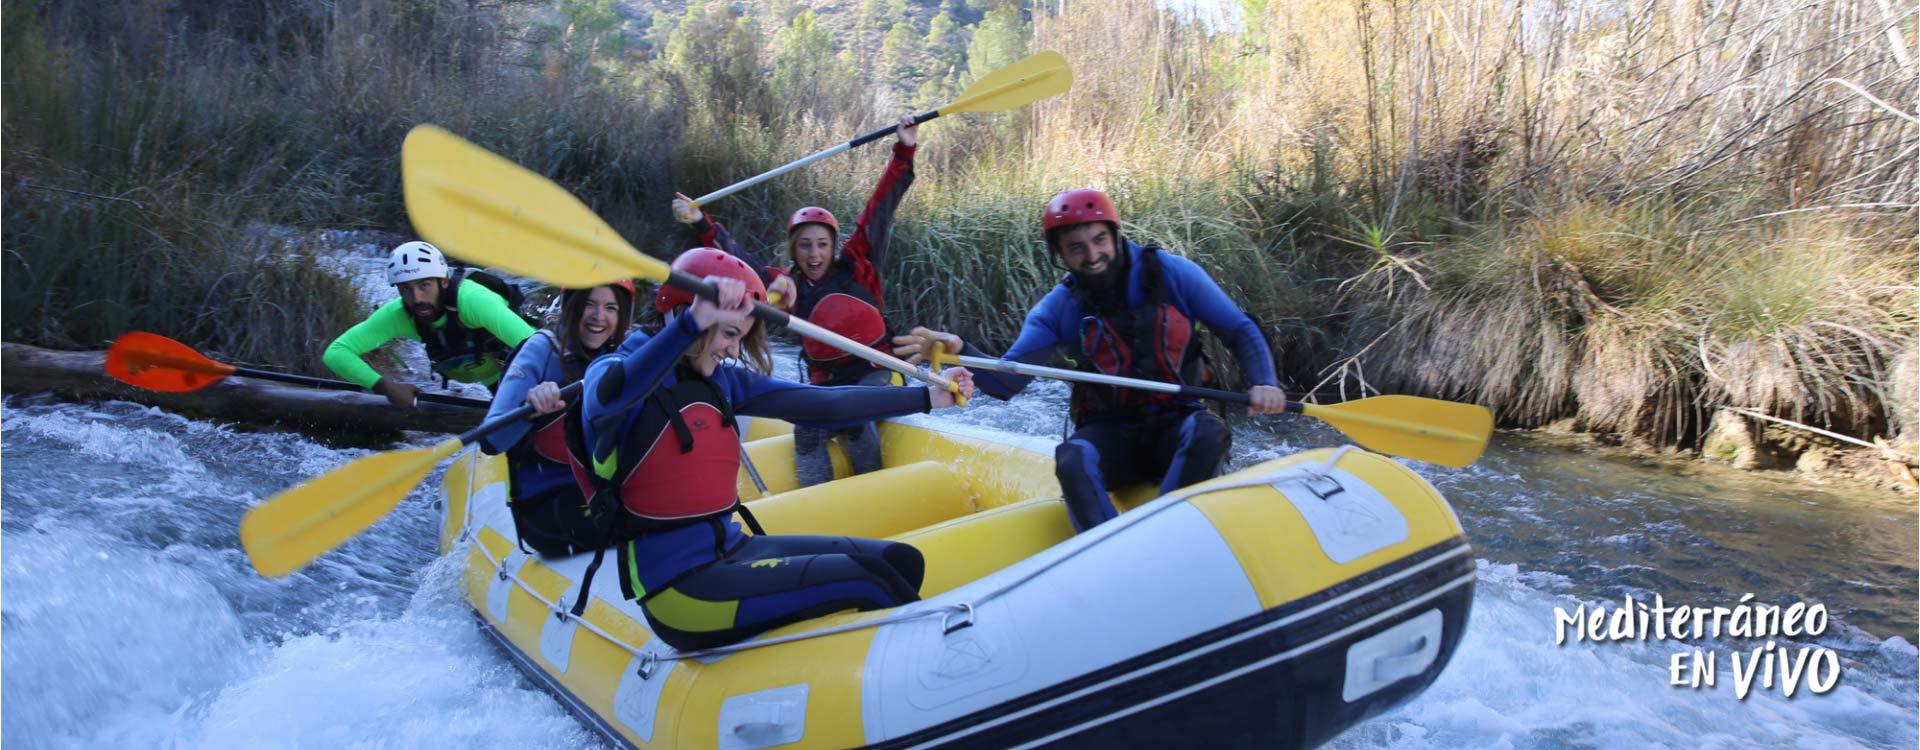 Four young people rafting in Venta del Moro